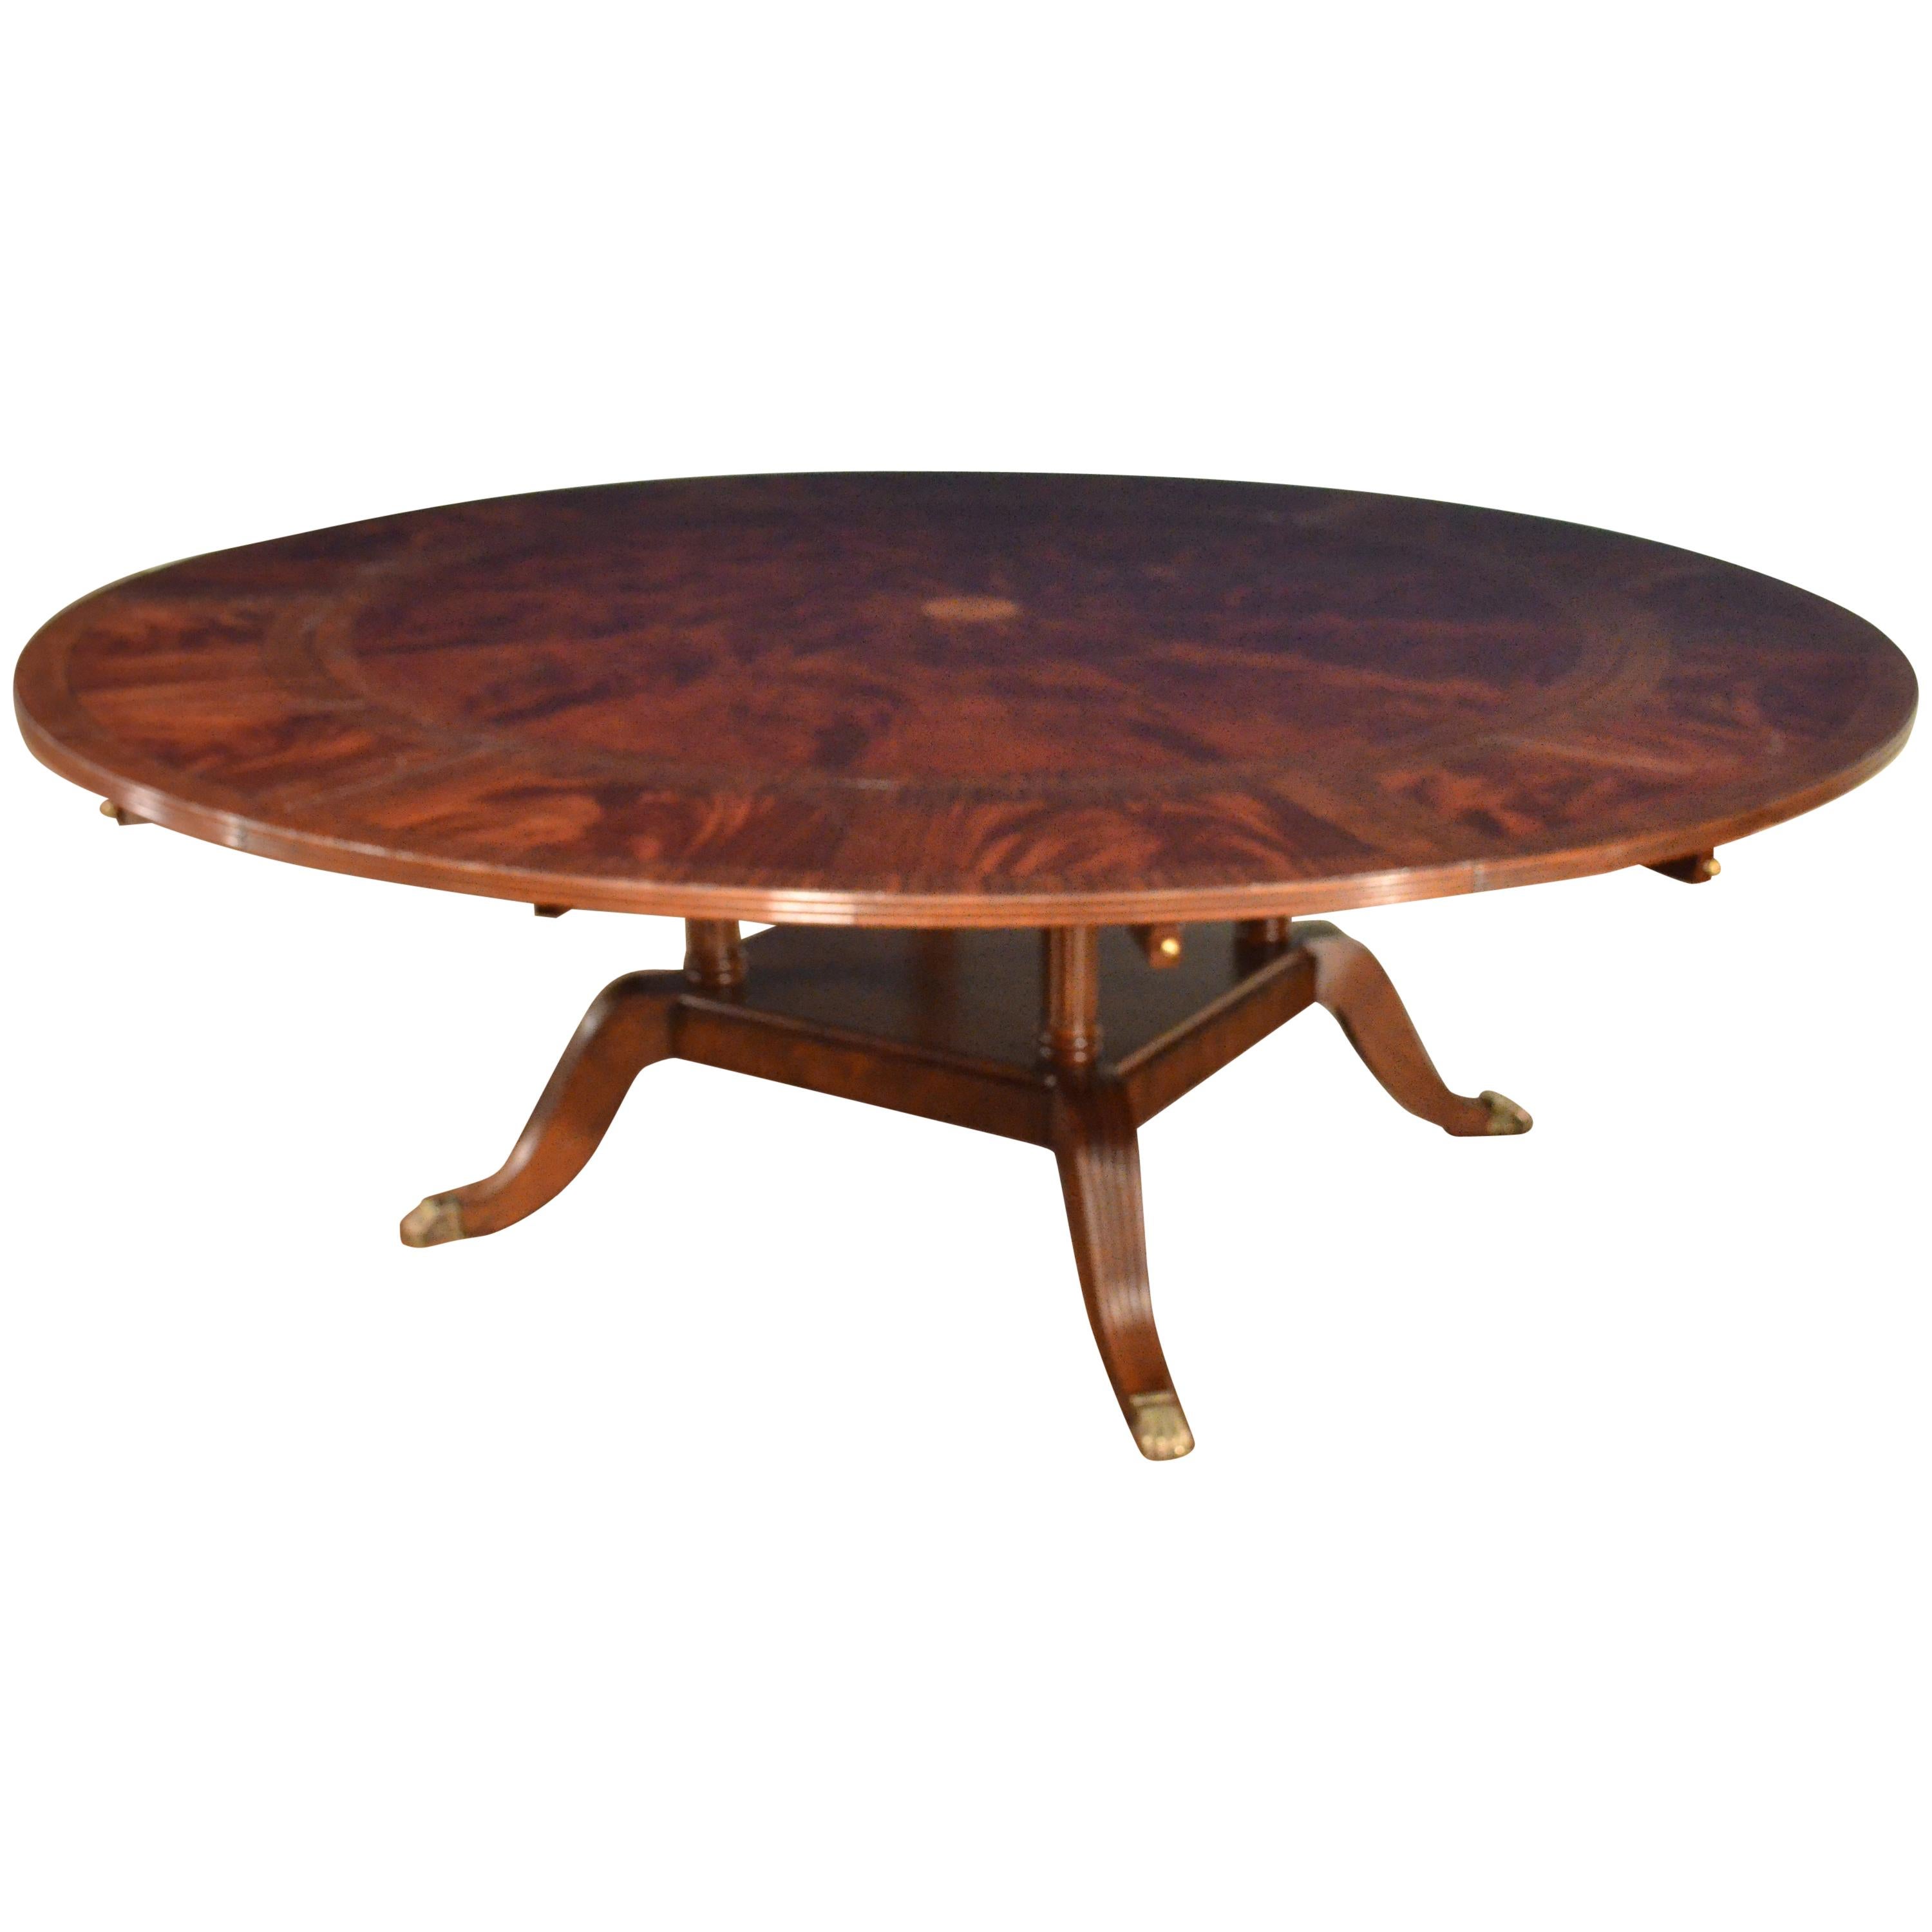 Large Round Perimeter Leaf Mahogany Georgian Style Dining Table by Leighton Hall